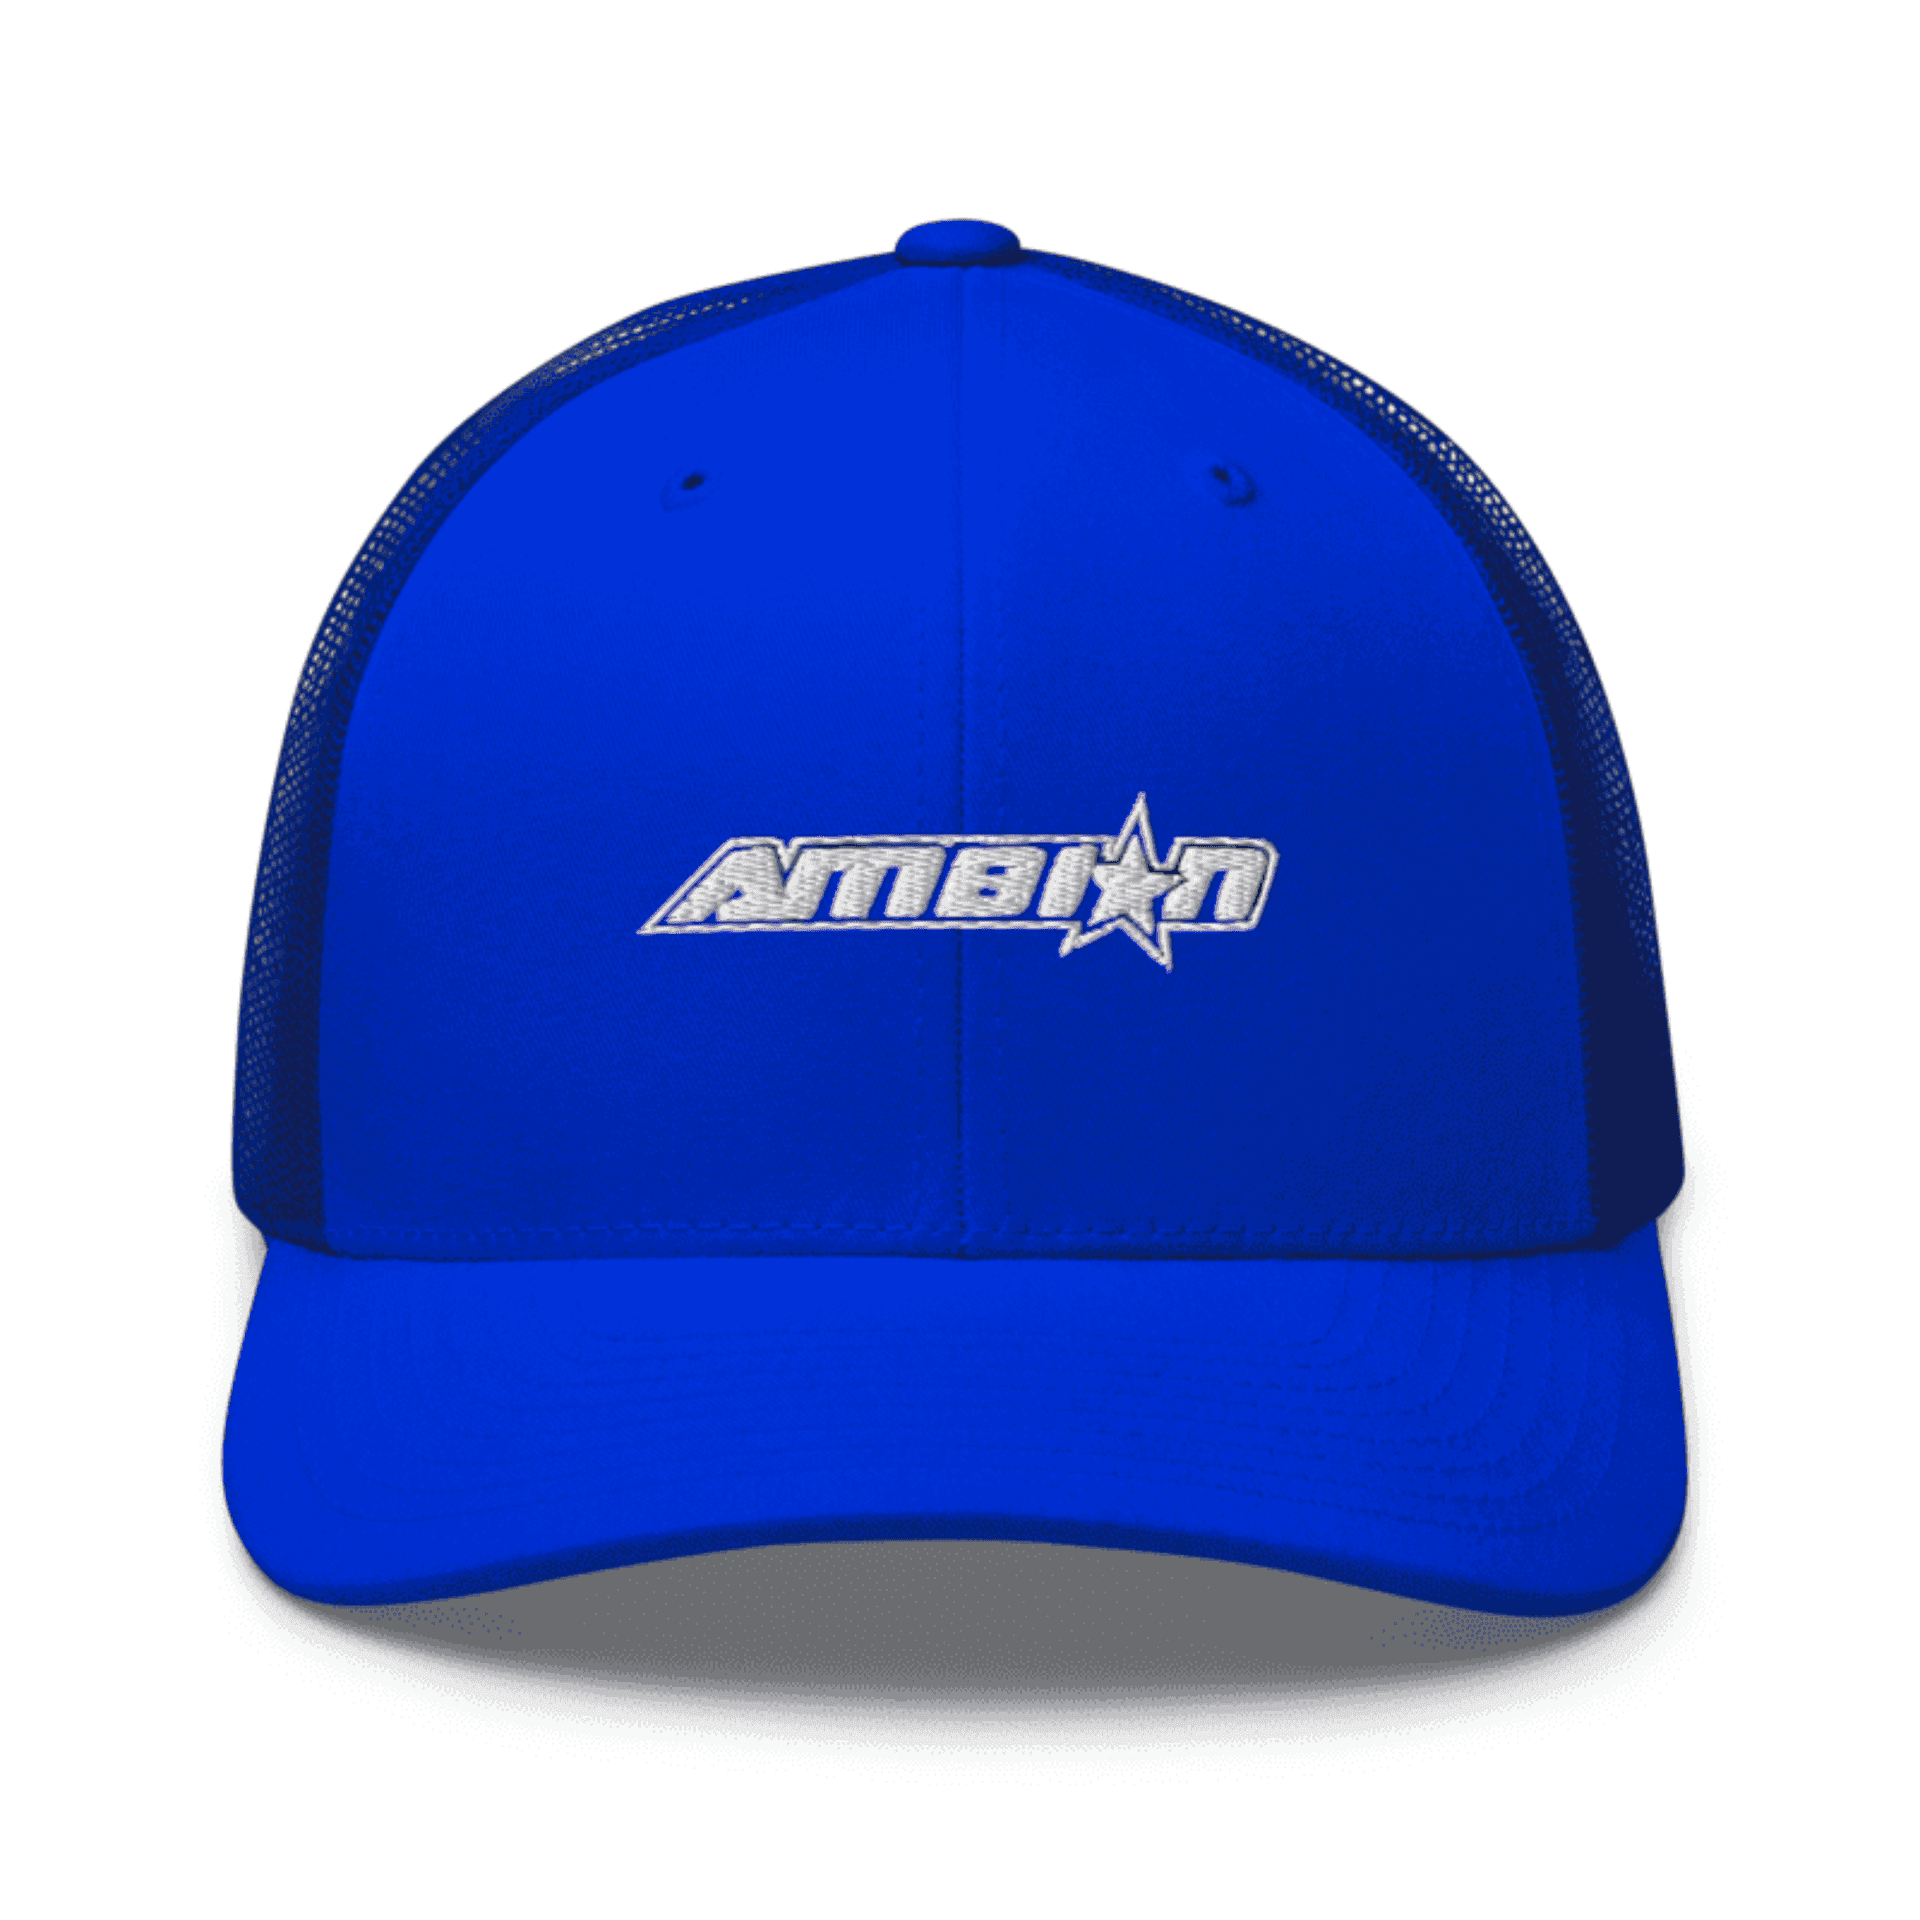 Frosted Flakes Blue Trucker Hat that is perfect for all day wear